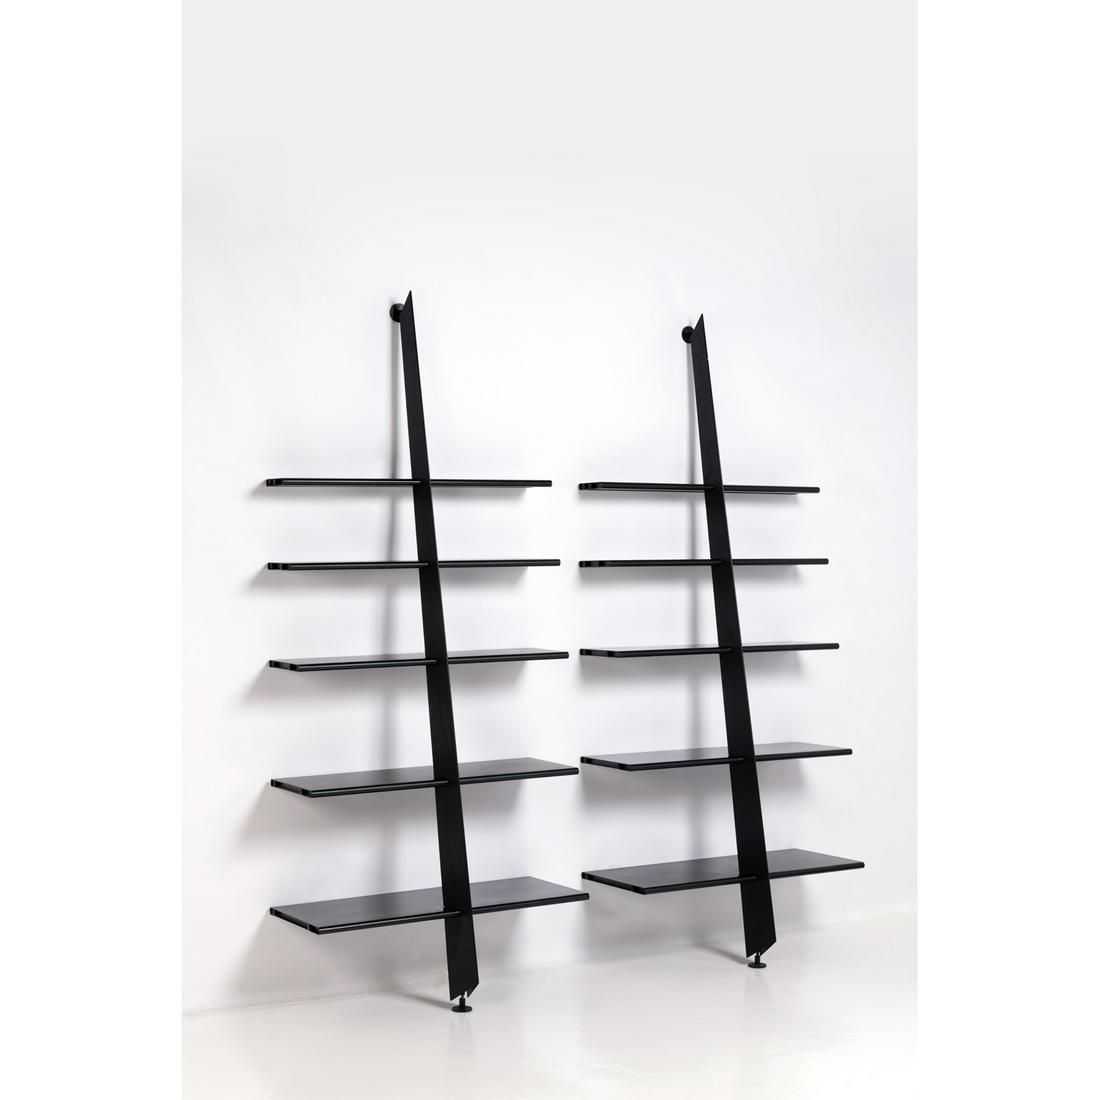 A pair of MacGee bookshelves by Philippe Starck realized €6,000 ($6,395) plus the buyer’s premium in December 2020. Image courtesy of Piasa and LiveAuctioneers.